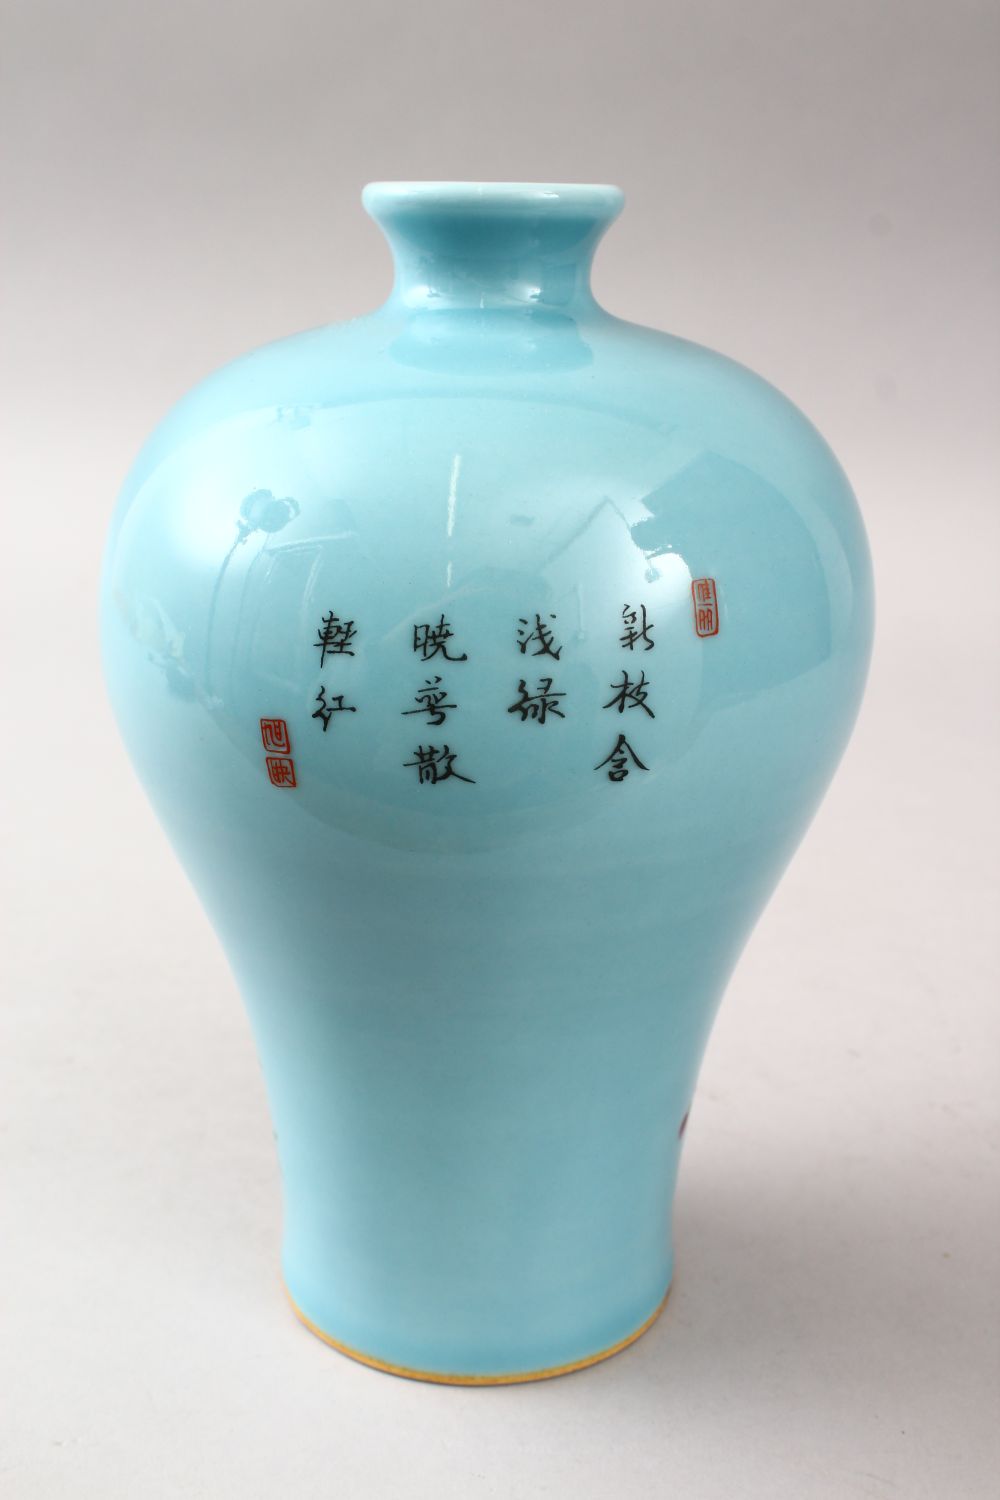 A GOOD CHINESE FAMILLE ROSE PORCELAIN MEIPING VASE, the body with a turquoise ground and decorated - Image 3 of 8